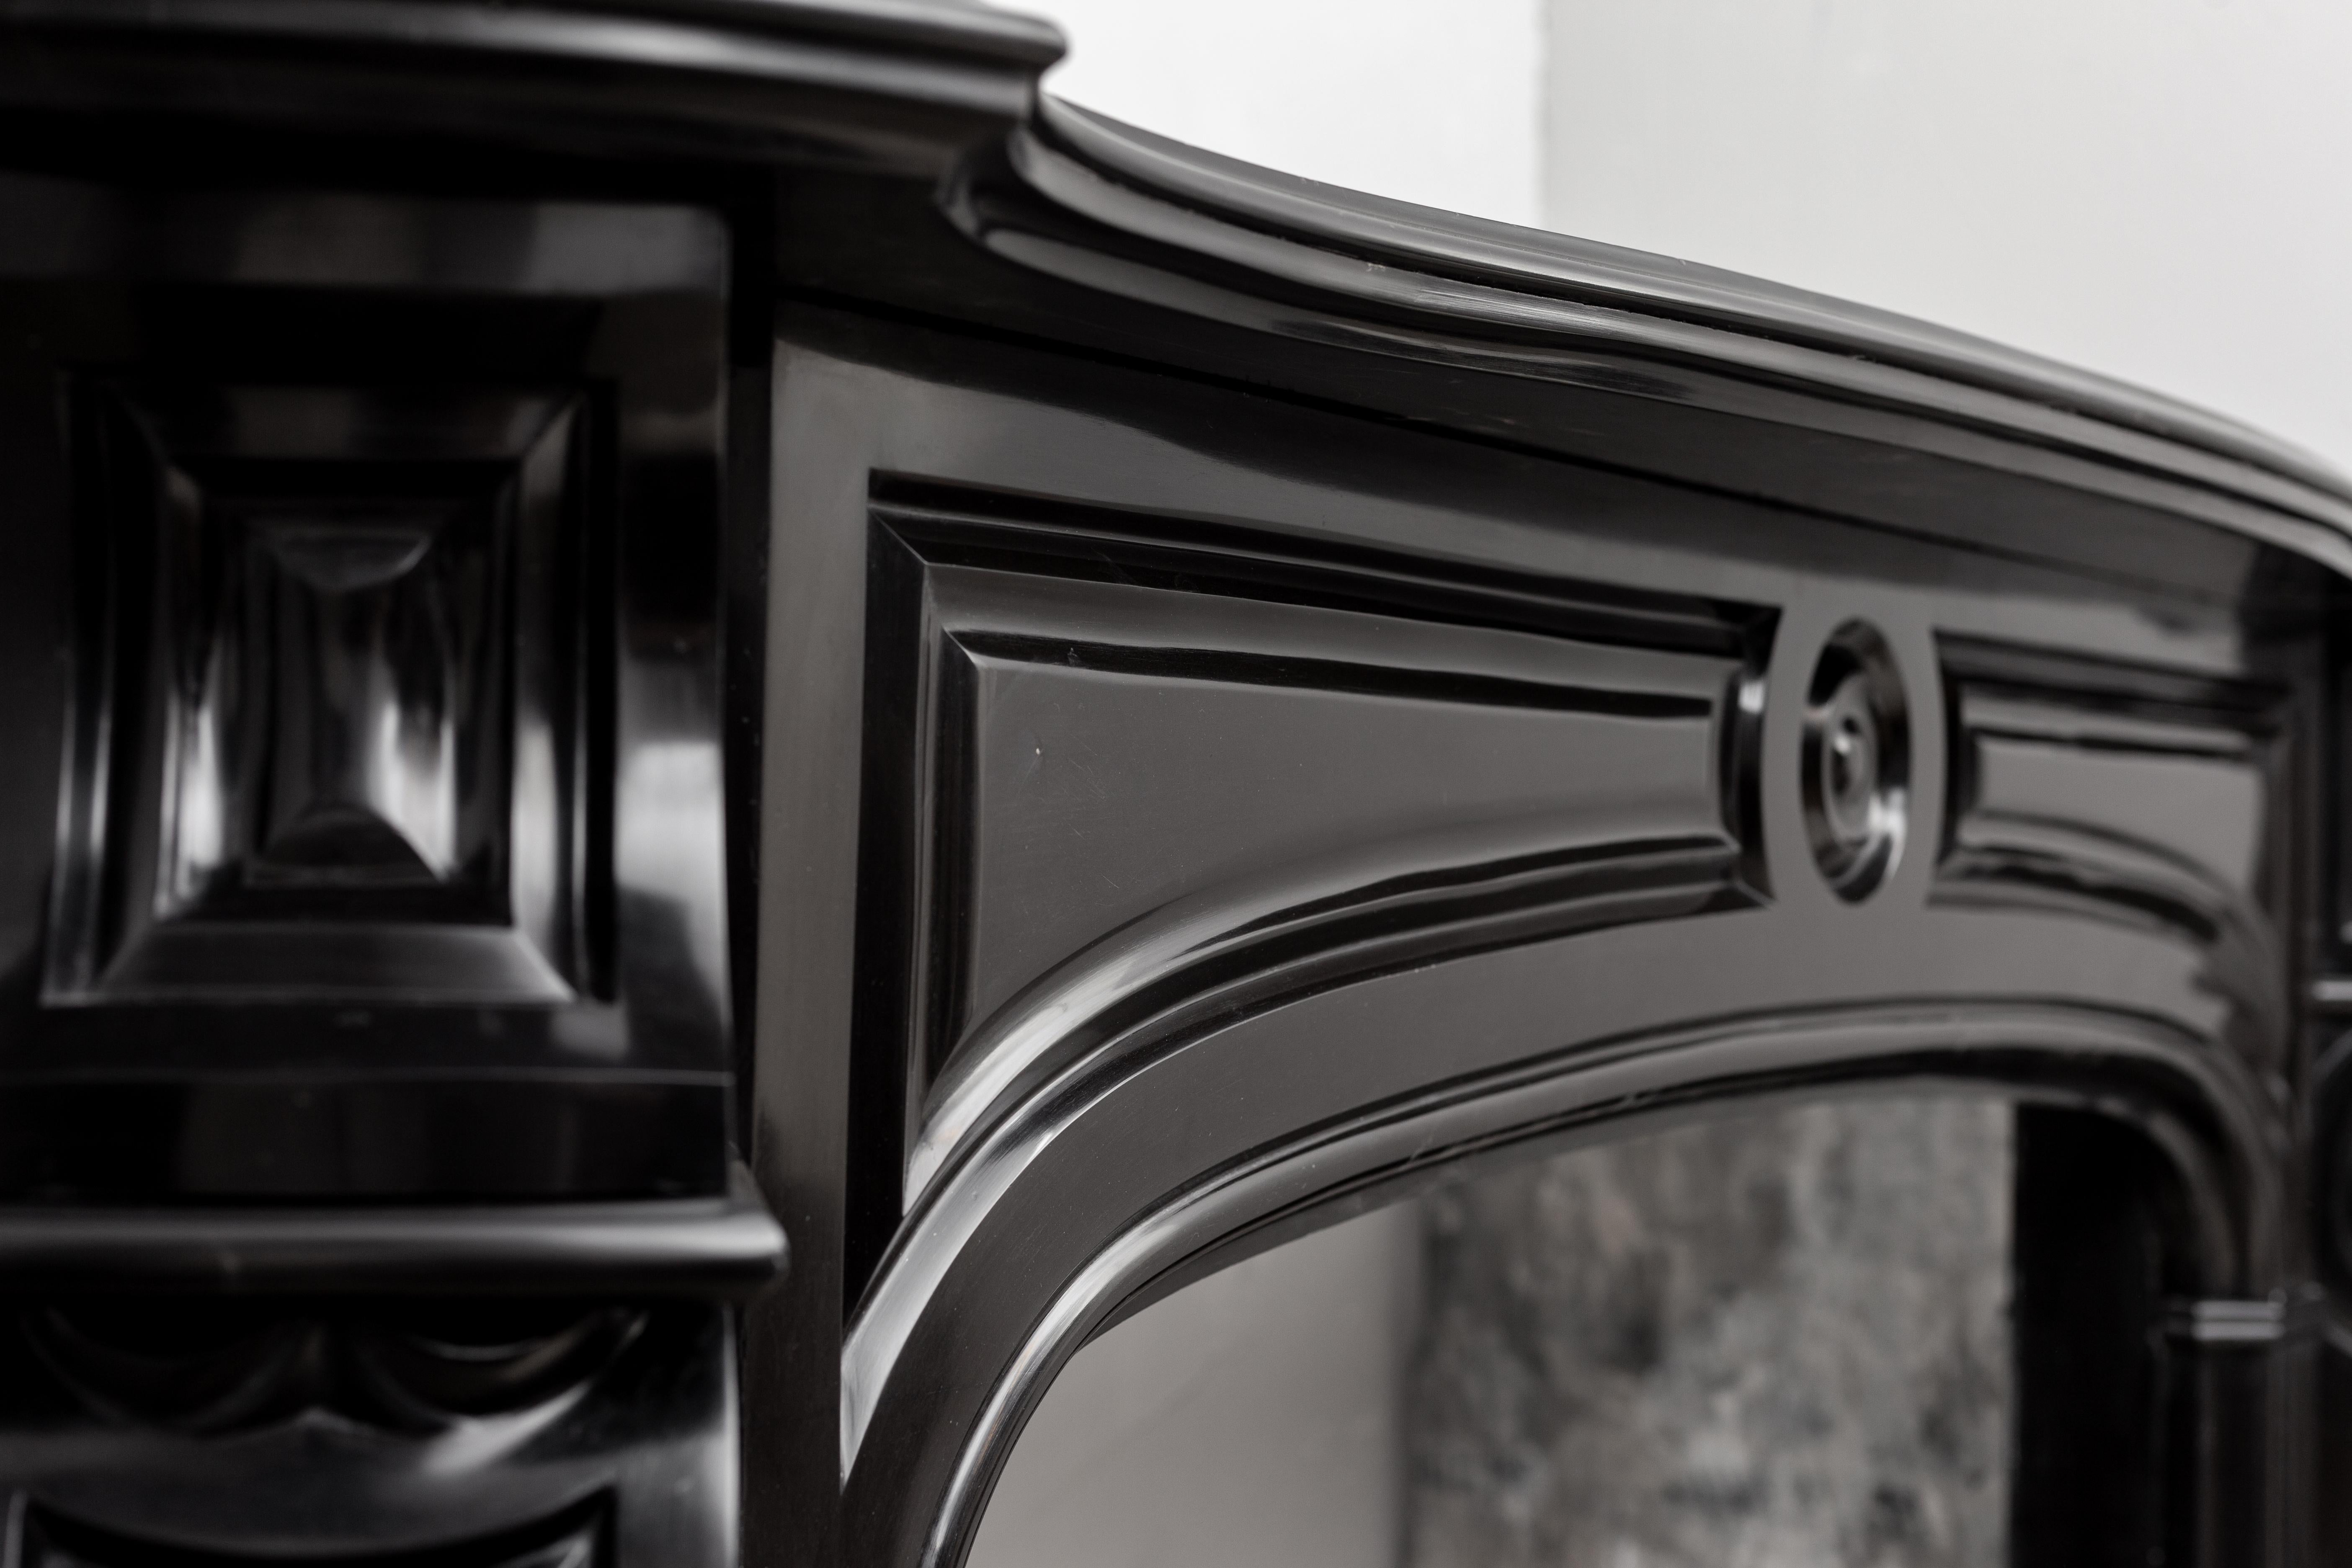 A magnificent marble fireplace wrapped in black marble: “Noir de Mazy”. An elegant combination of craftsmanship and distinctive styles. Everything about this mantelpiece is right, the round shapes of the decorated interior lintel make it a nostalgic